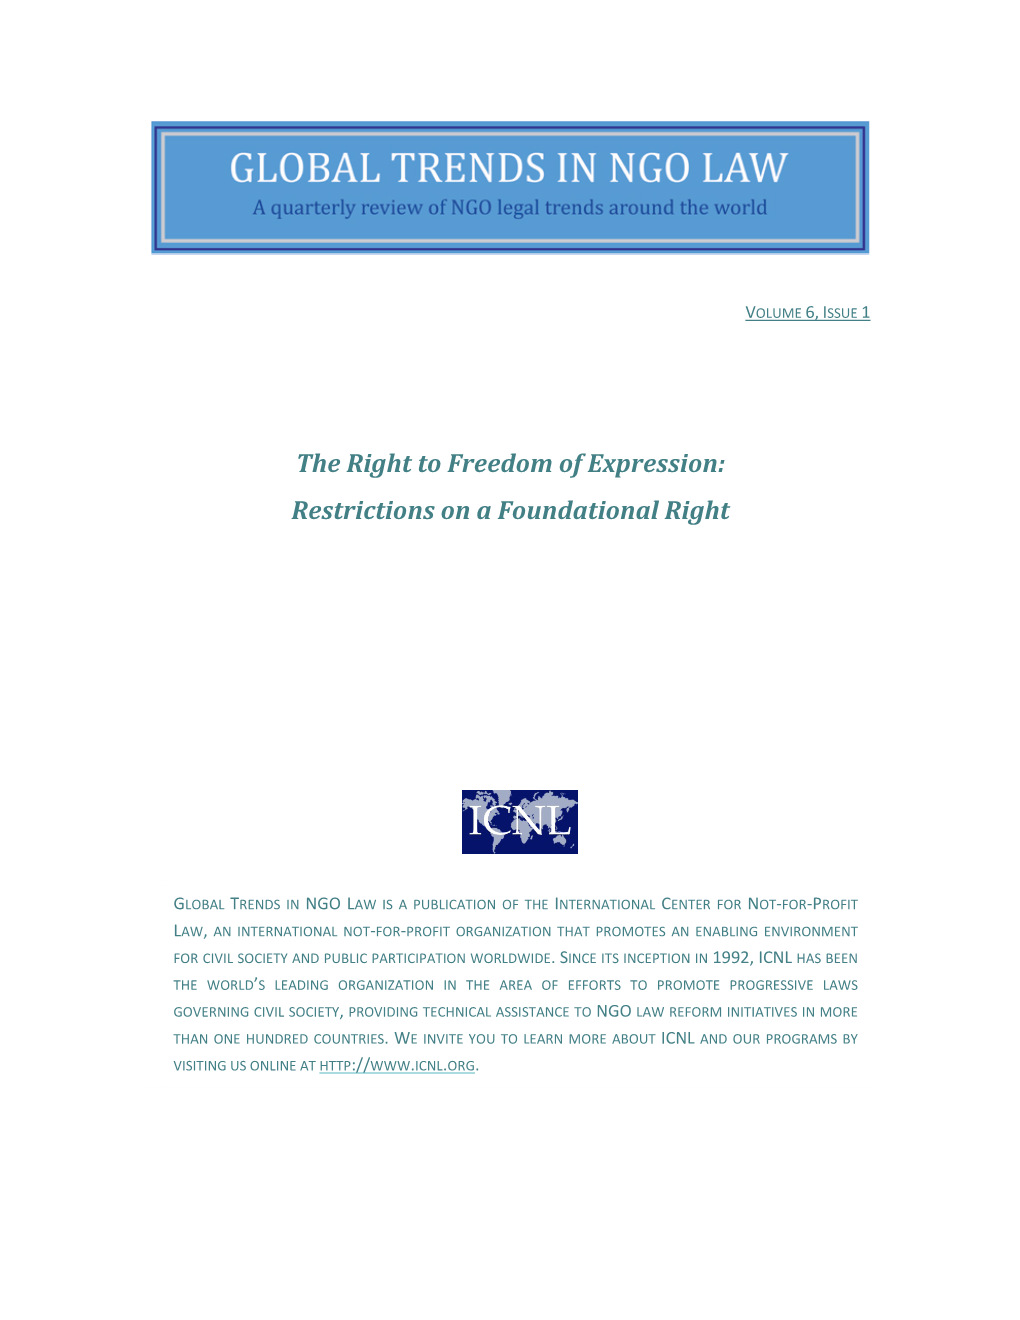 The Right to Freedom of Expression: Restrictions on a Foundational Right